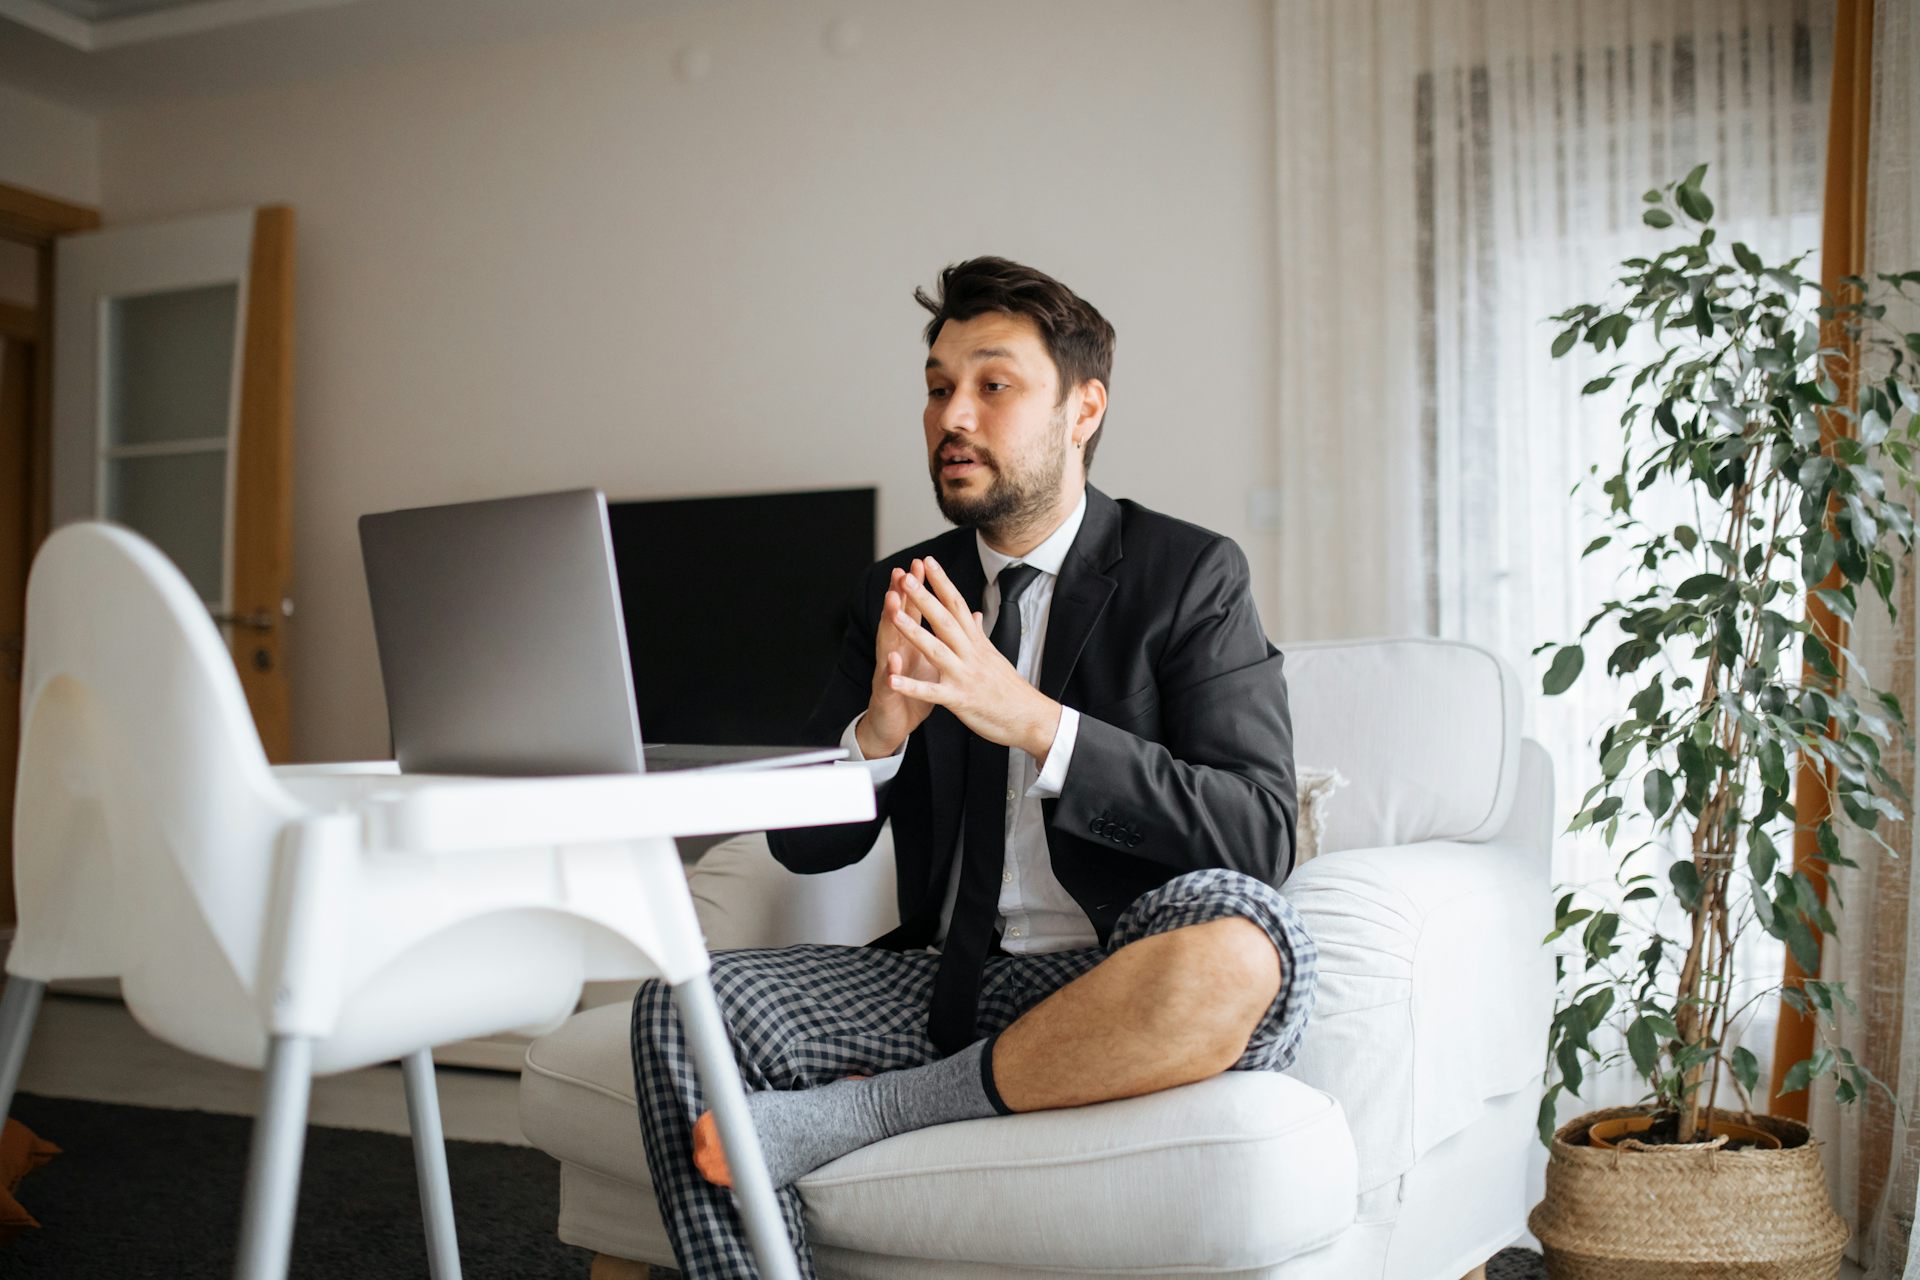 Pants or no pants? Tips for virtual job interviews from home